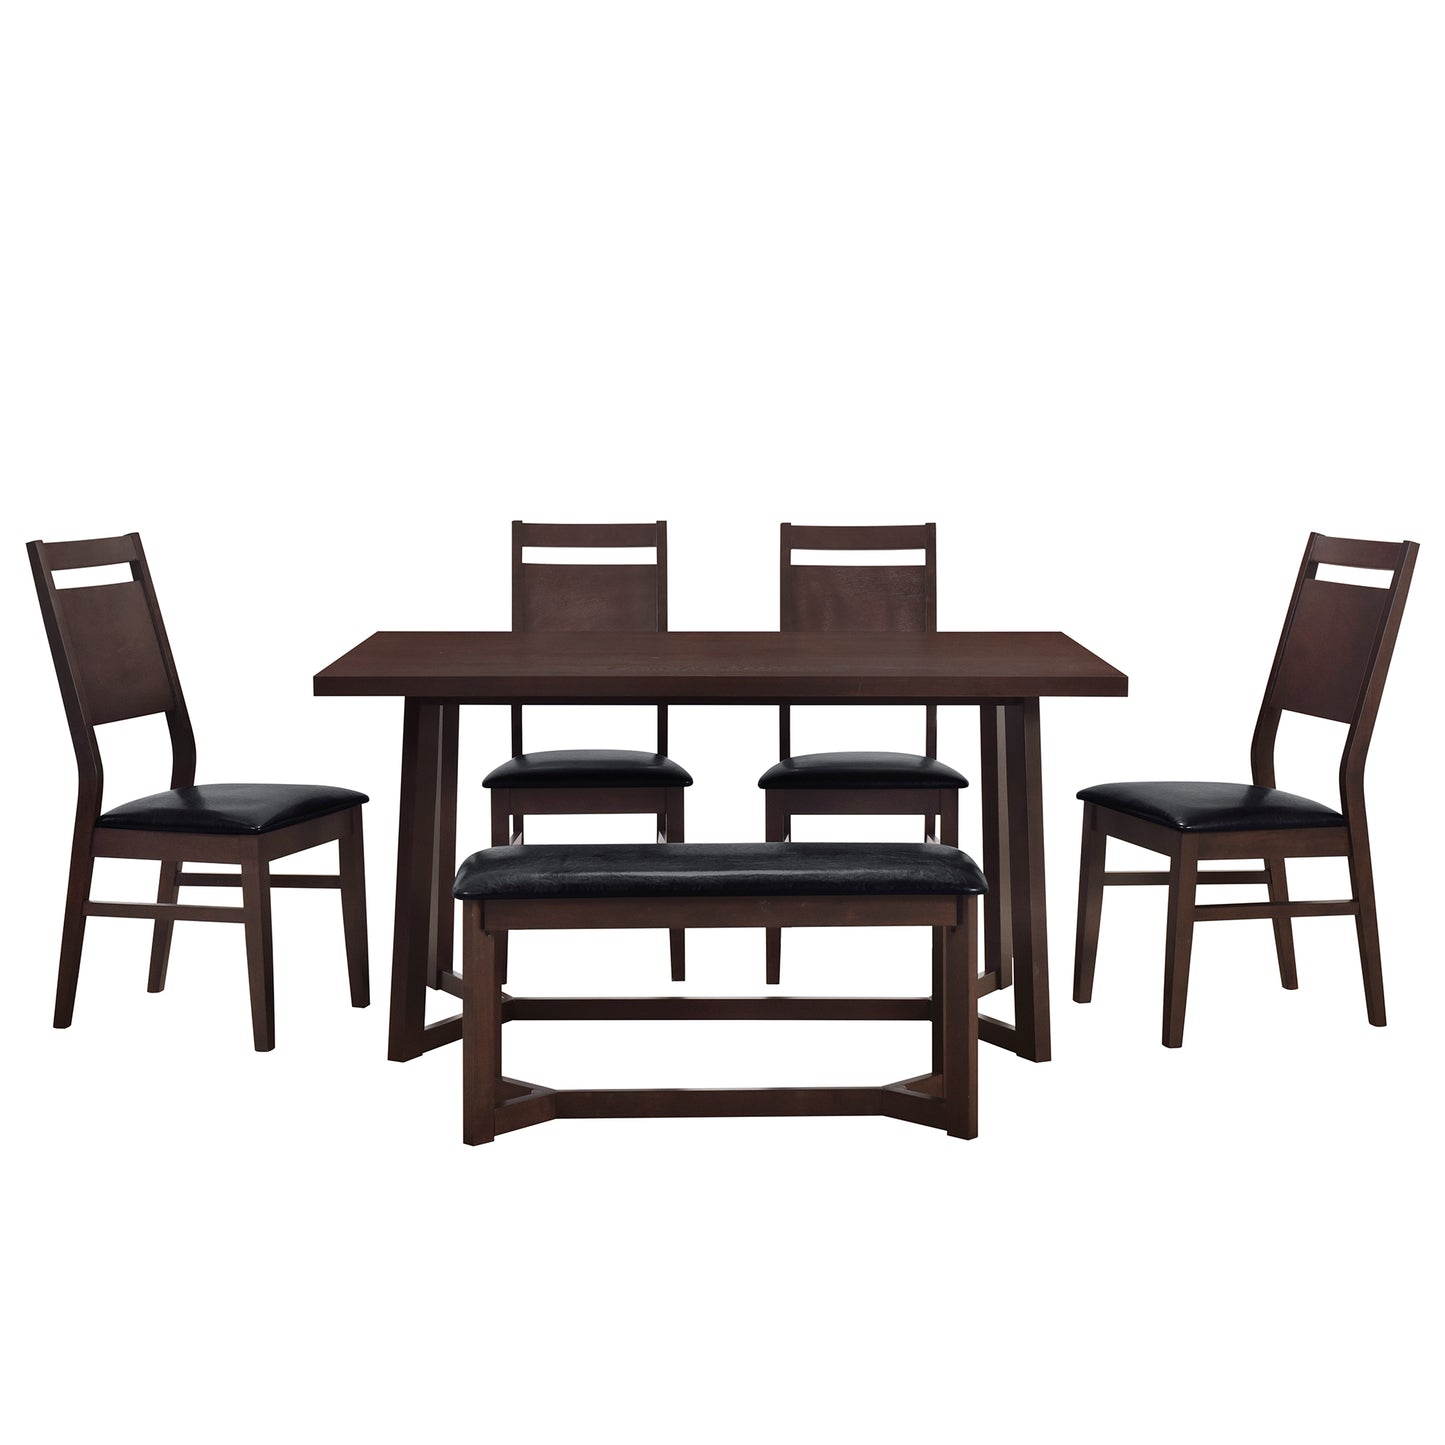 TOPMAX Farmhouse 6-Piece Wood Dining Table Set with 4 Upholstered Chairs and Bench, Dark Brown